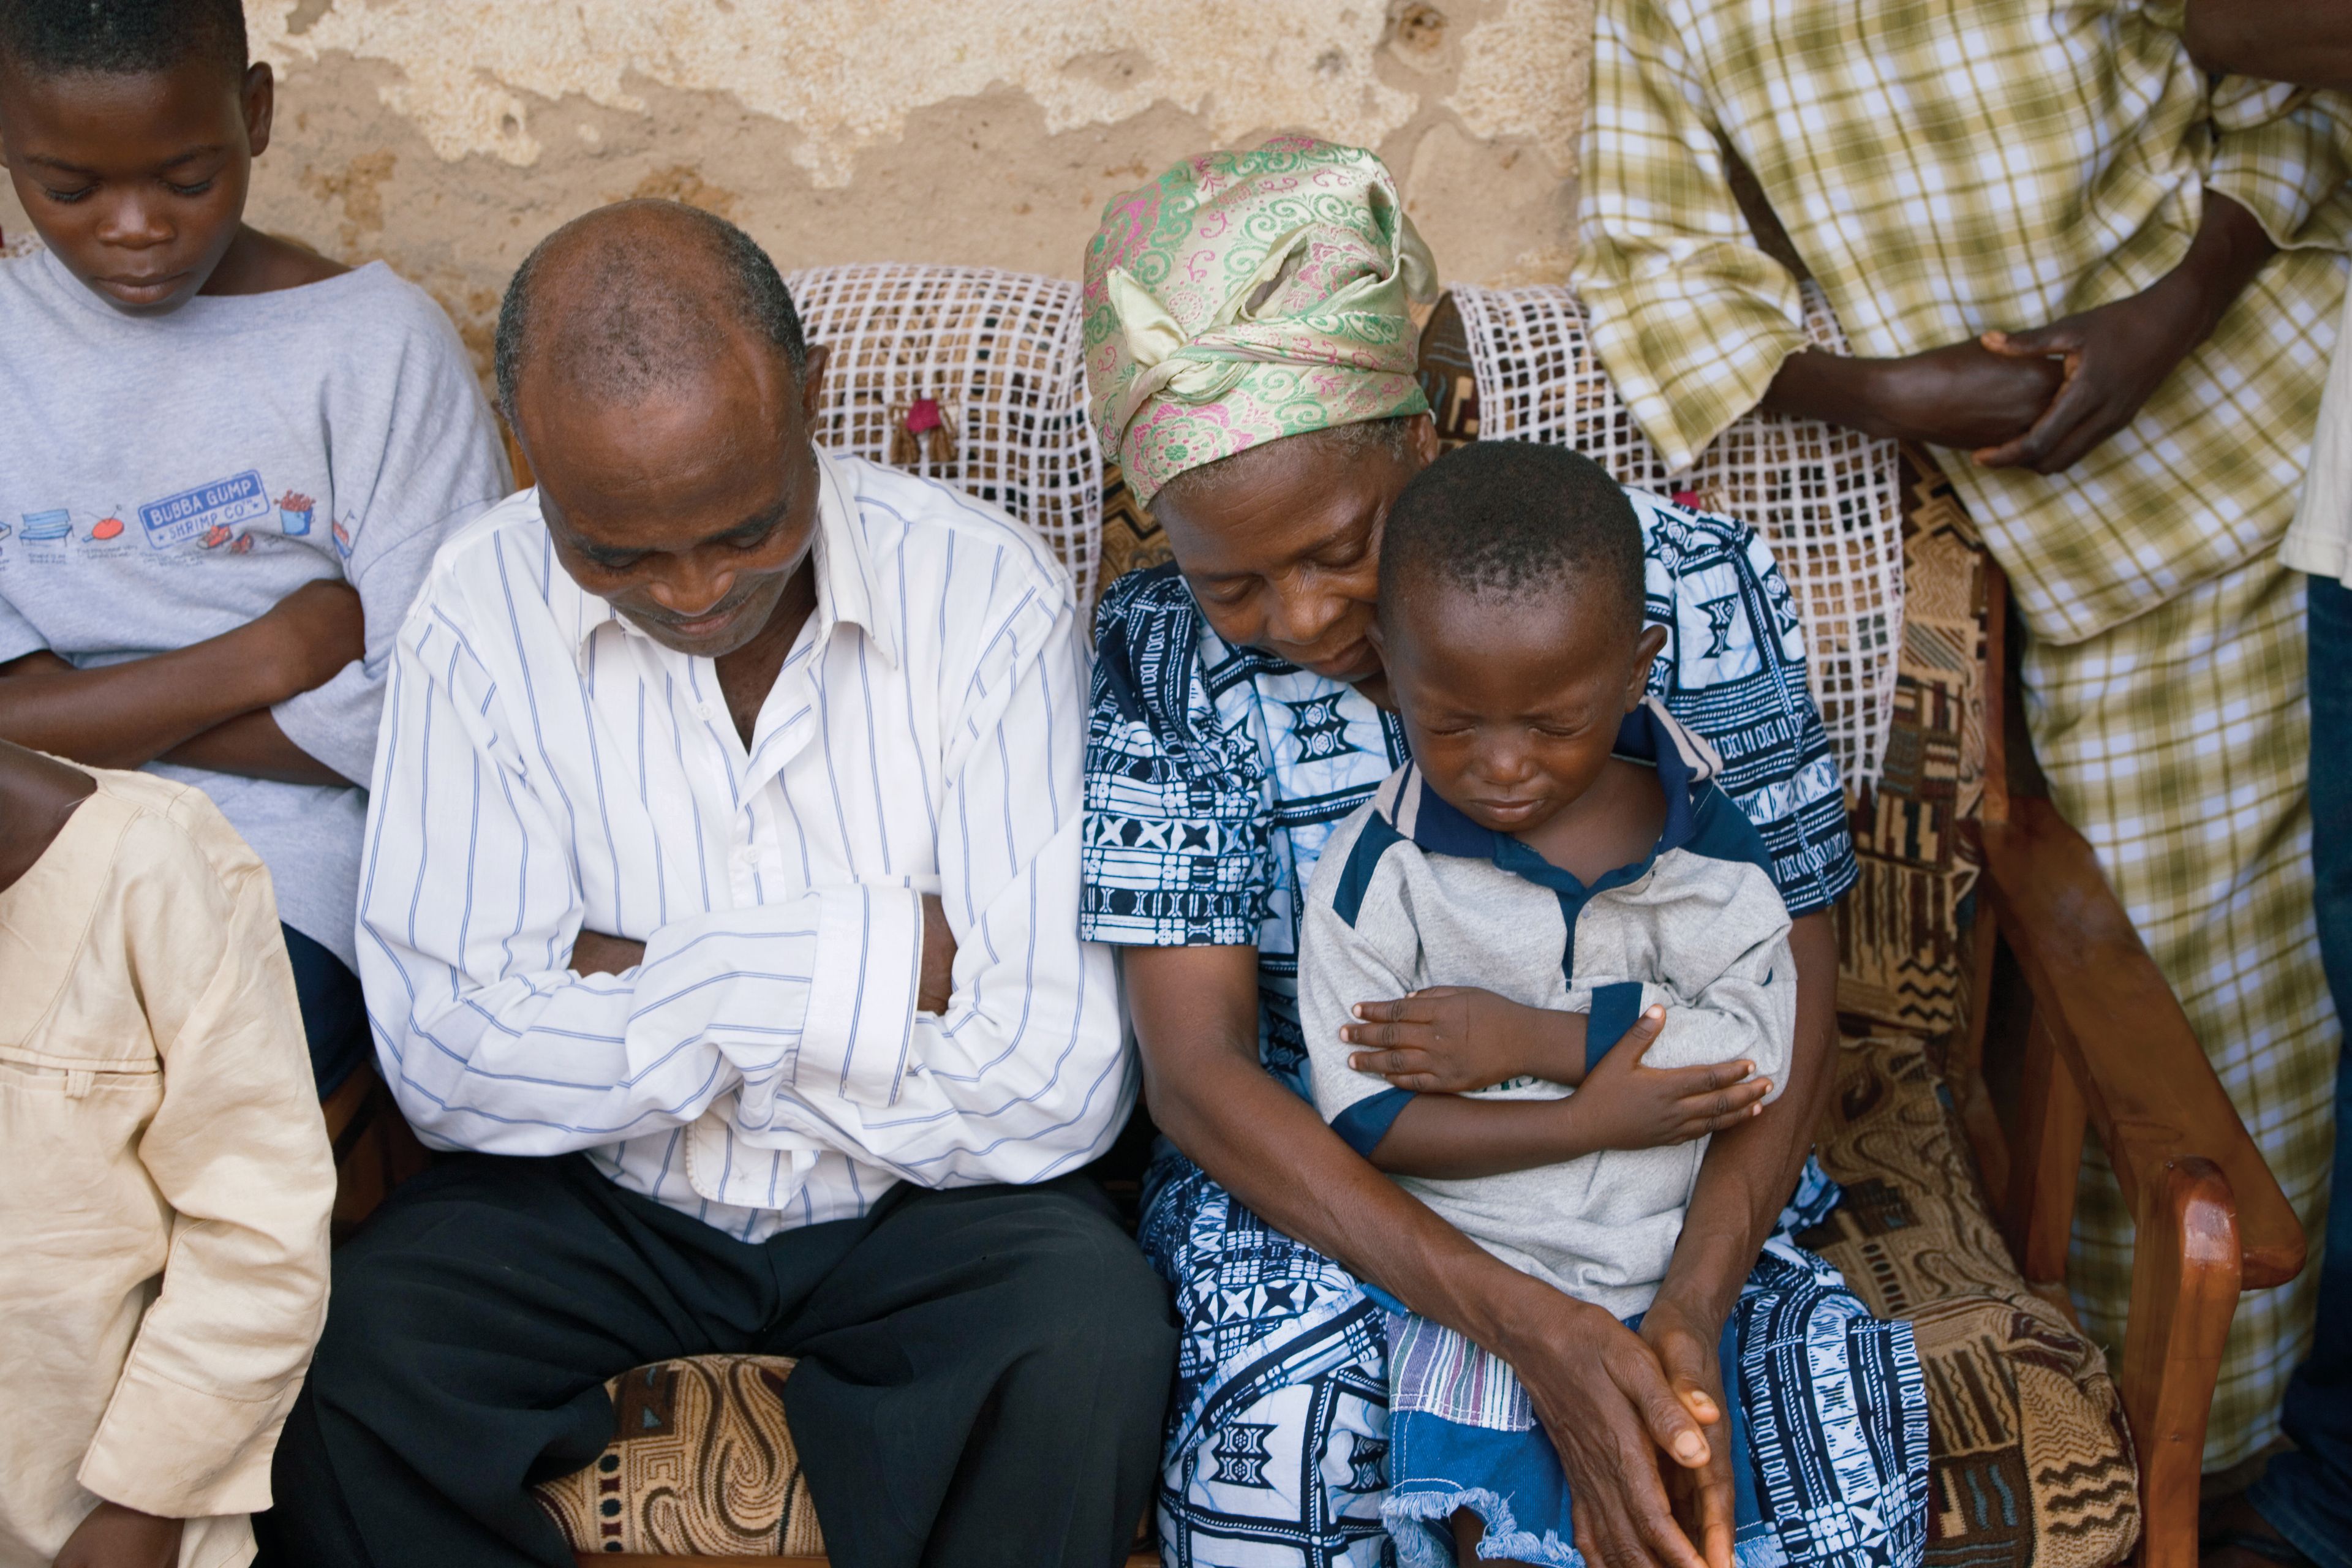 A family in Africa sitting and praying together.